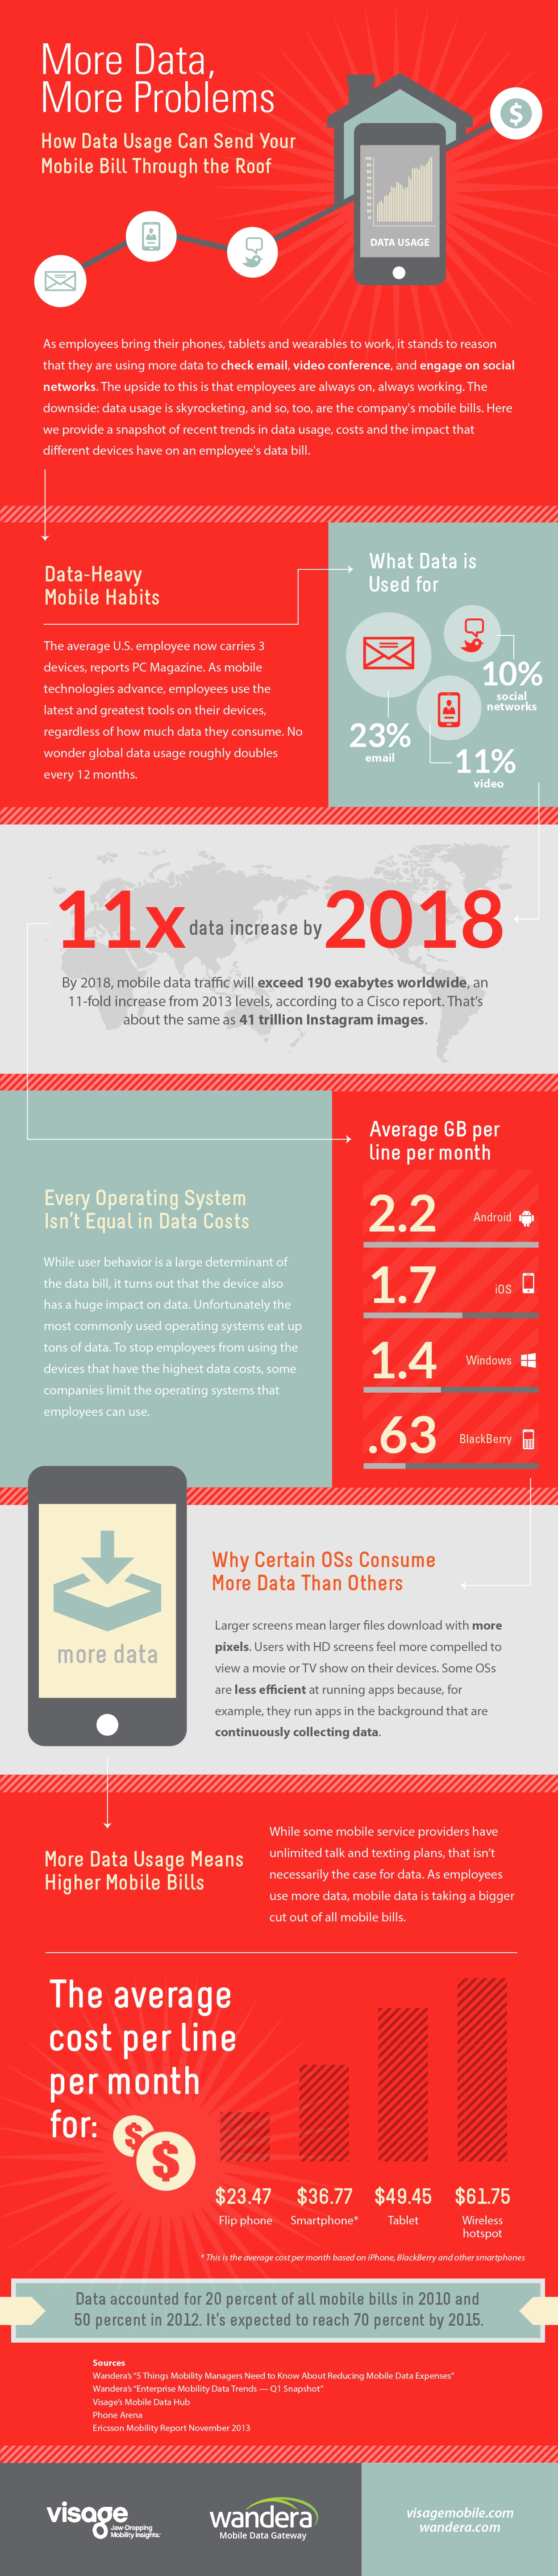 visage data usage final1 - Infographic Friday: Mobility - More Data, More Problems